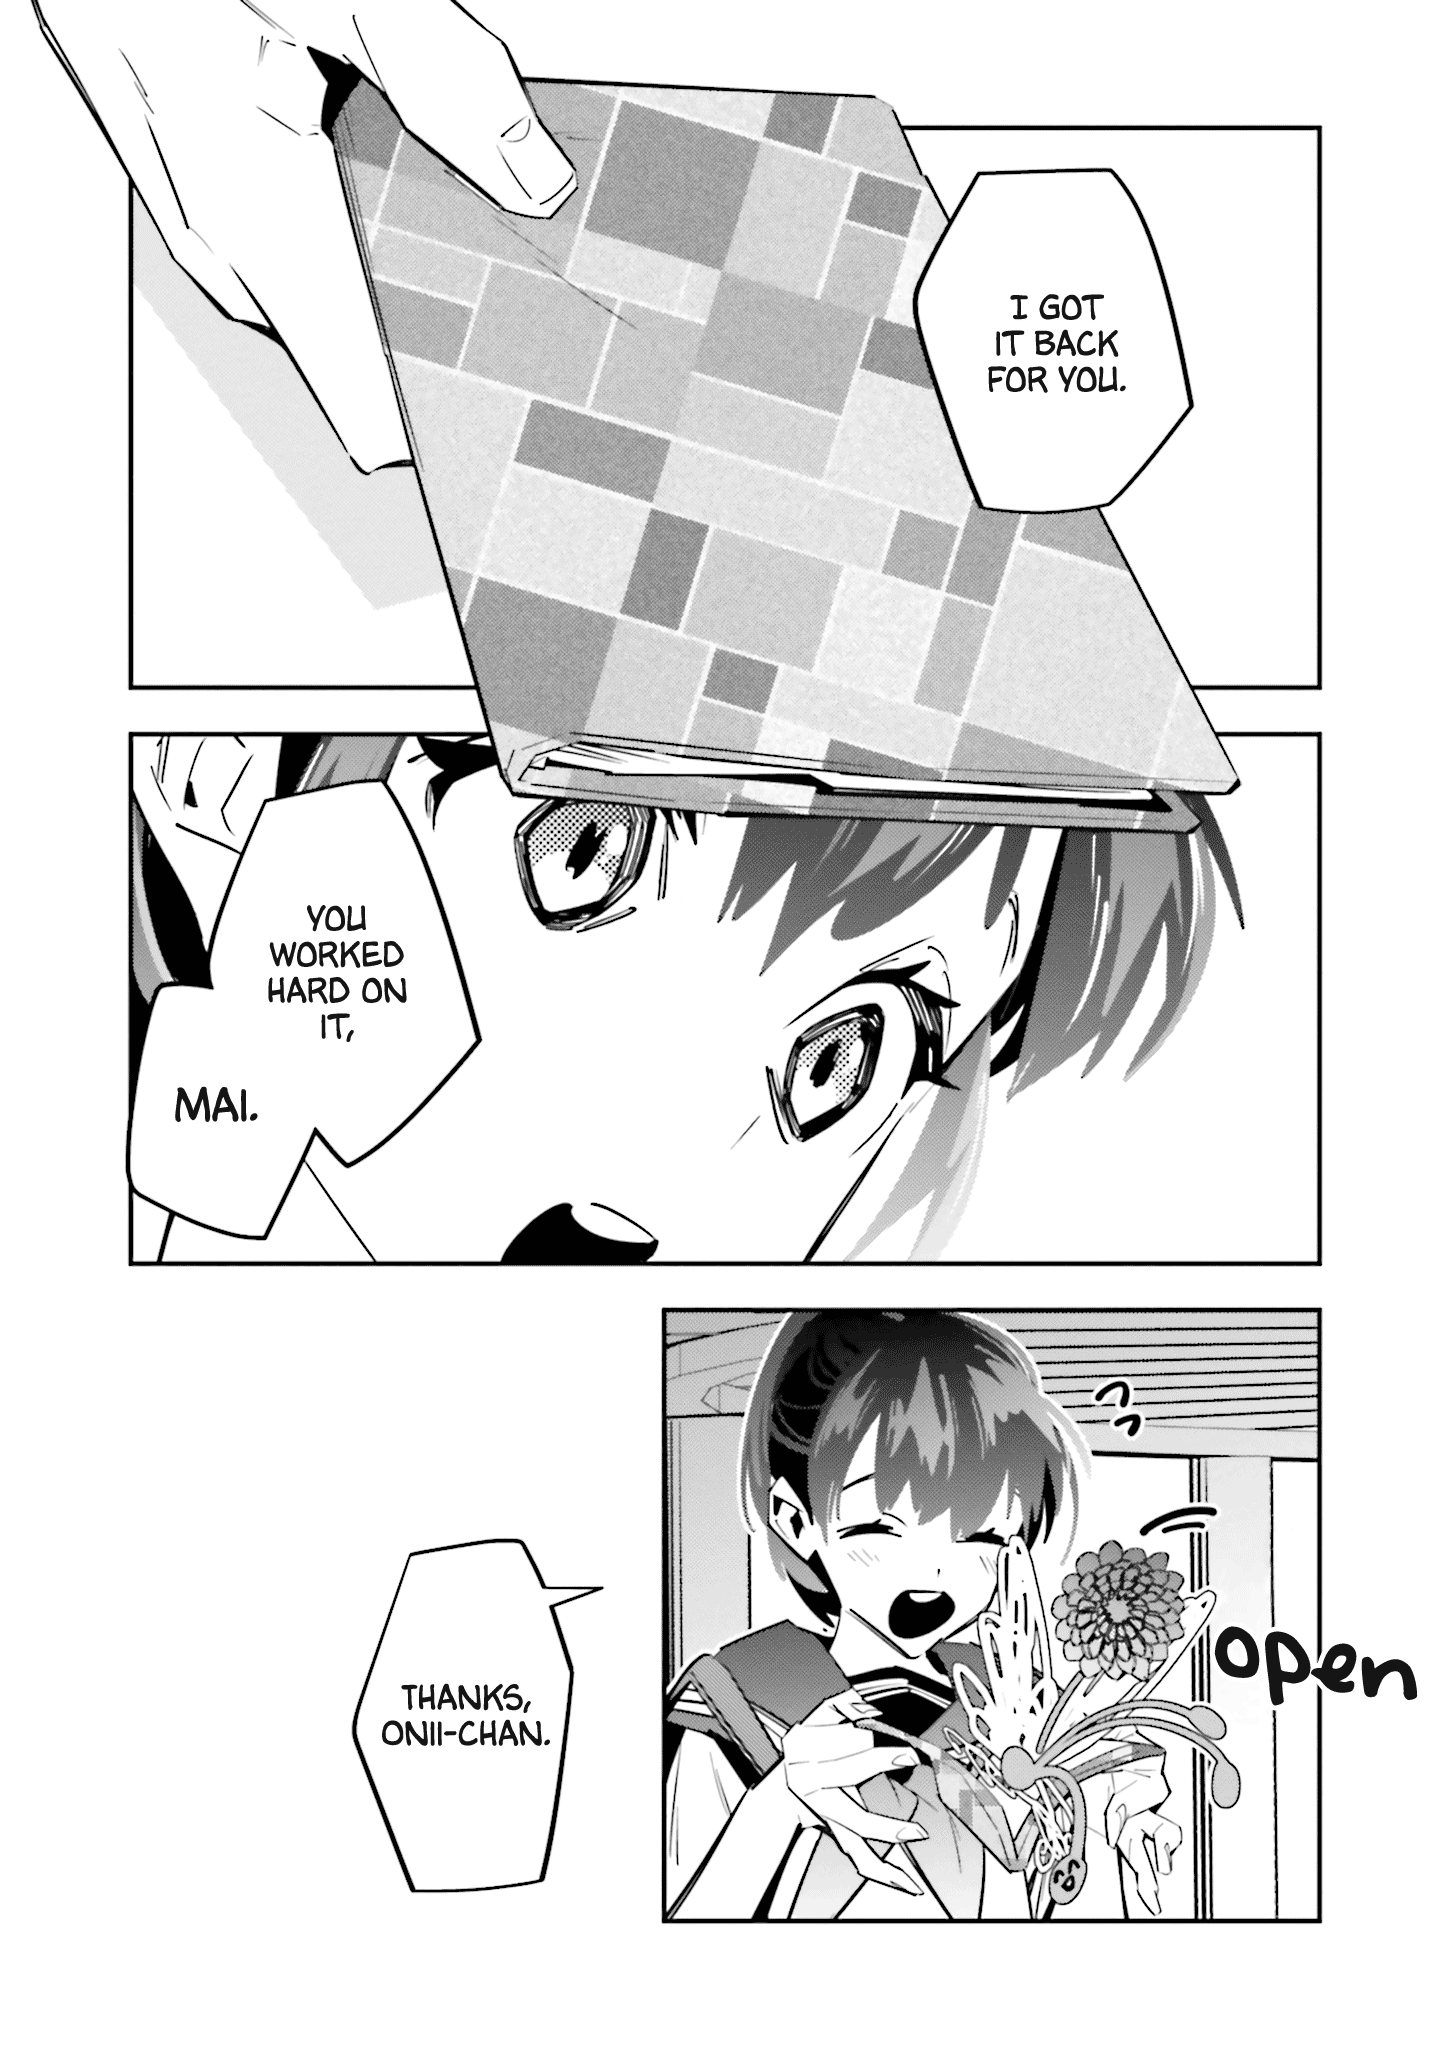 I Reincarnated As The Little Sister Of A Death Game Manga's Murder Mastermind And Failed Chapter 2 #26